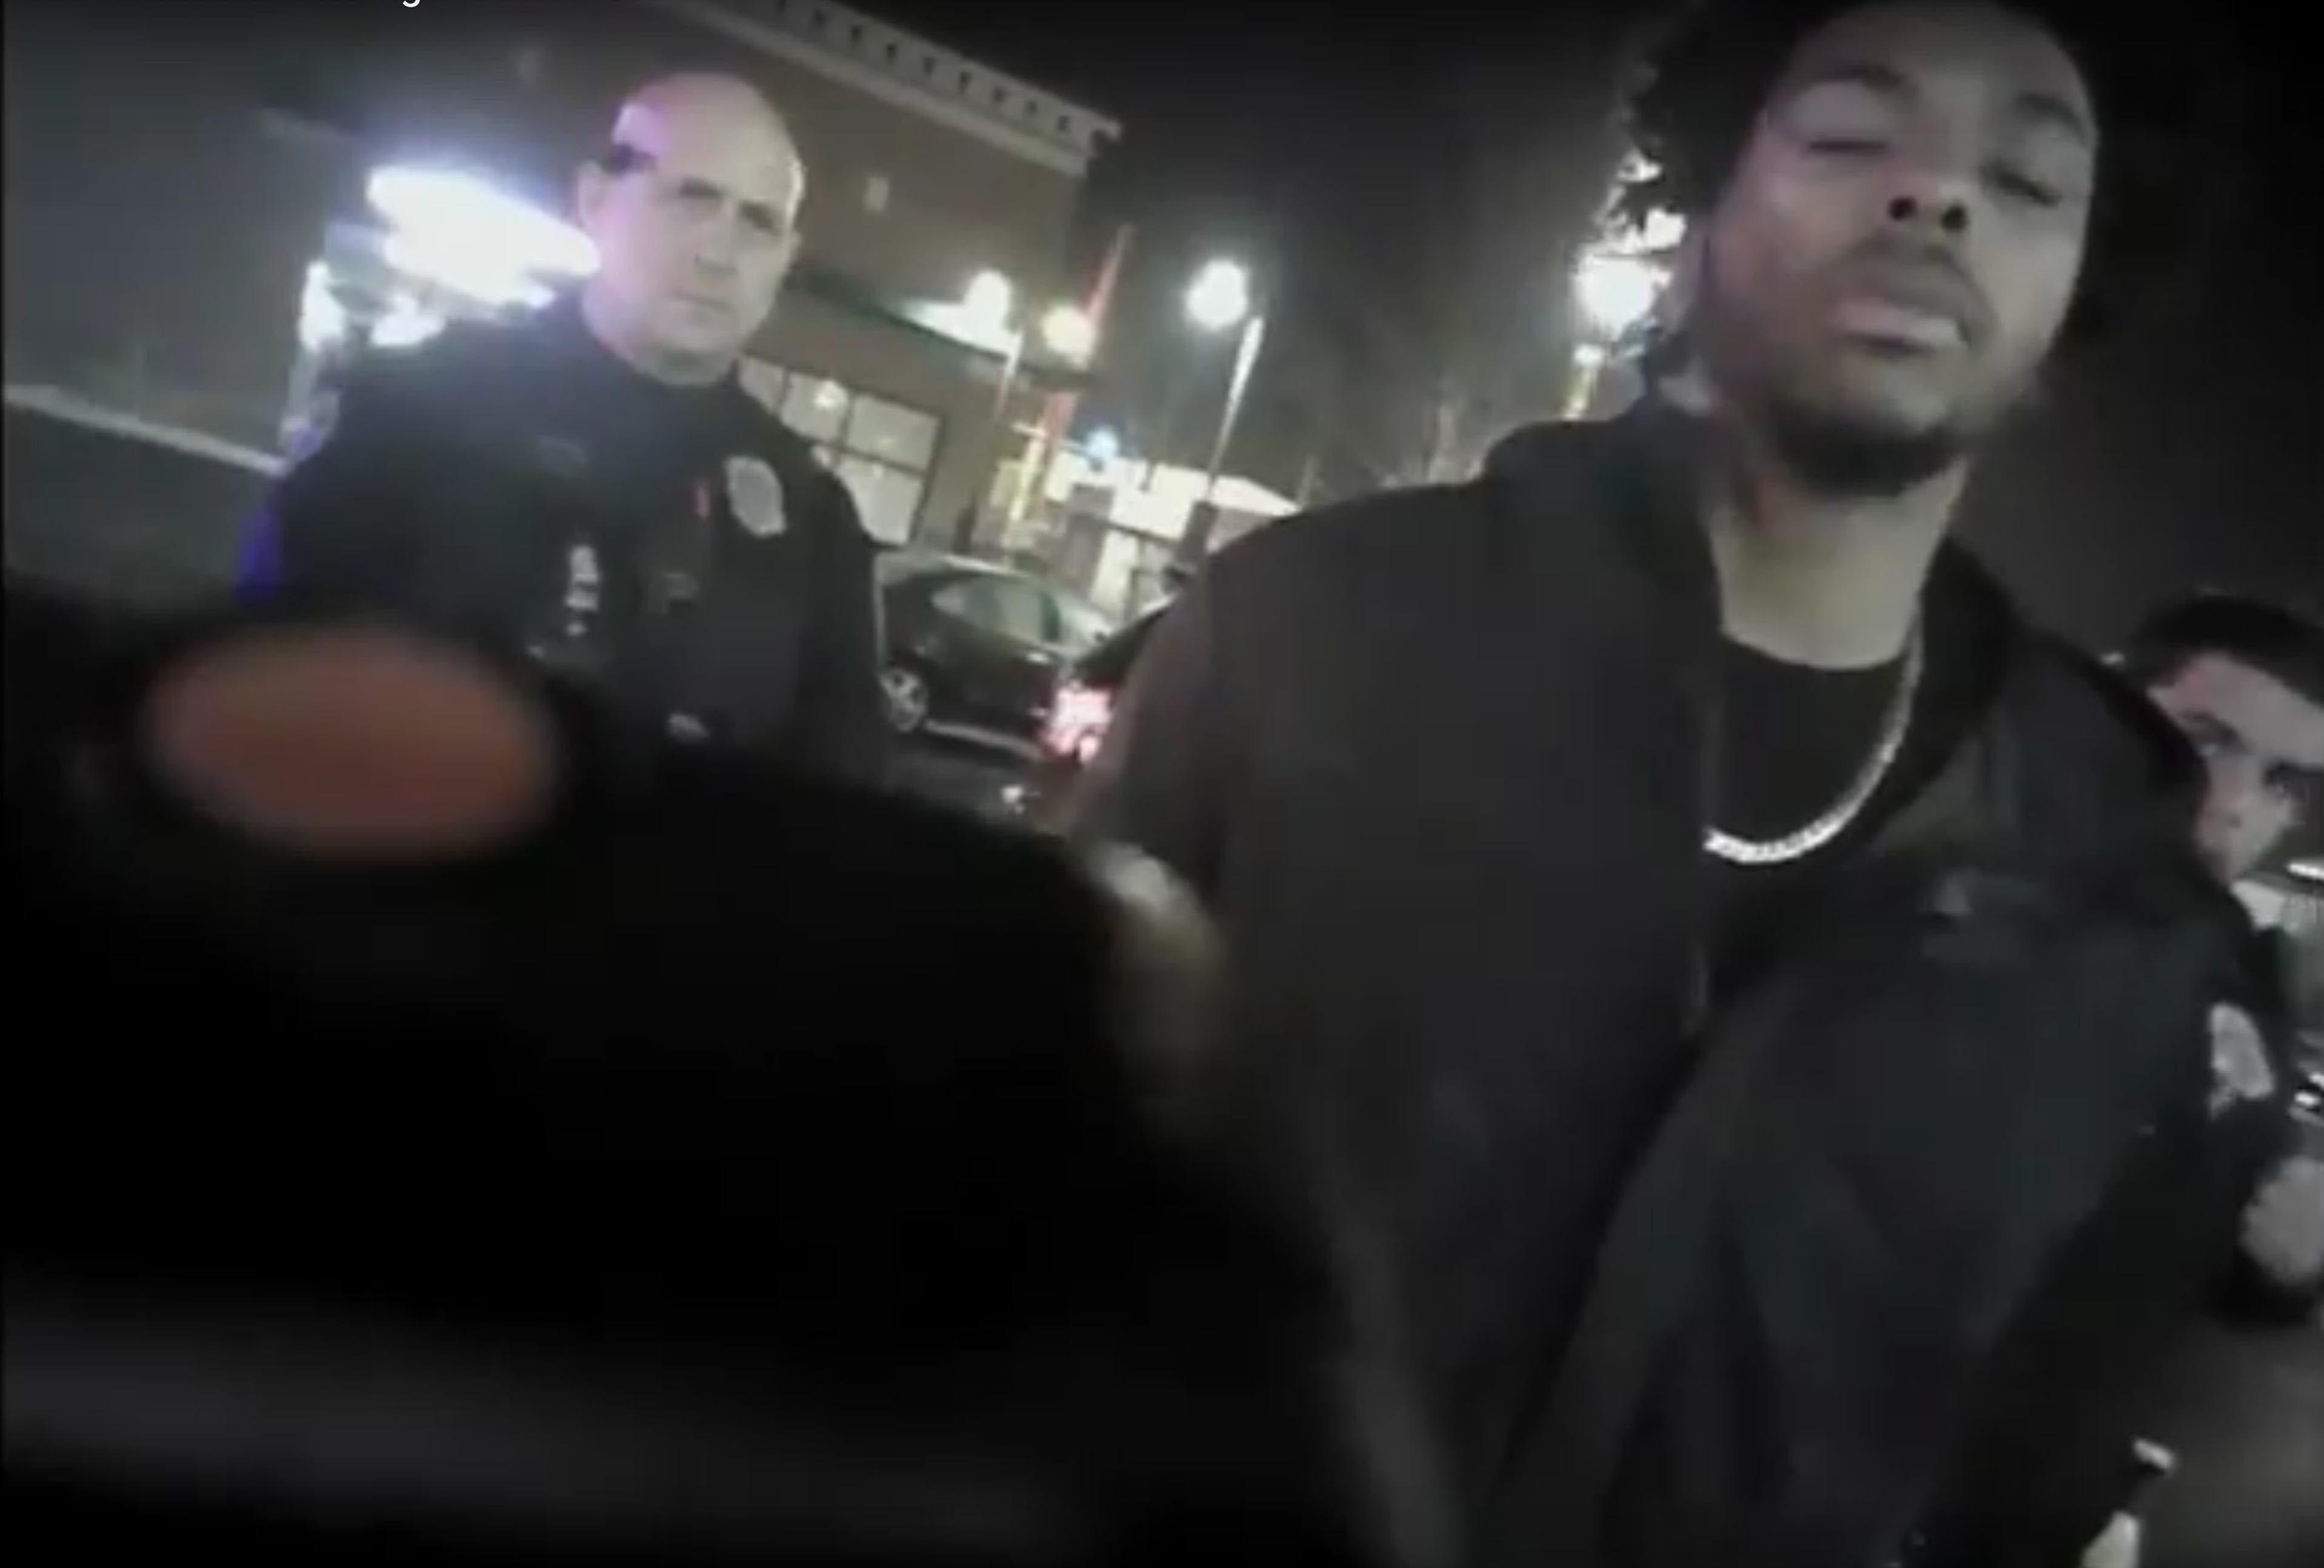 Wisconsin Supreme Court upholds ex-Milwaukee police officer's firing for racist post after Sterling Brown's arrest